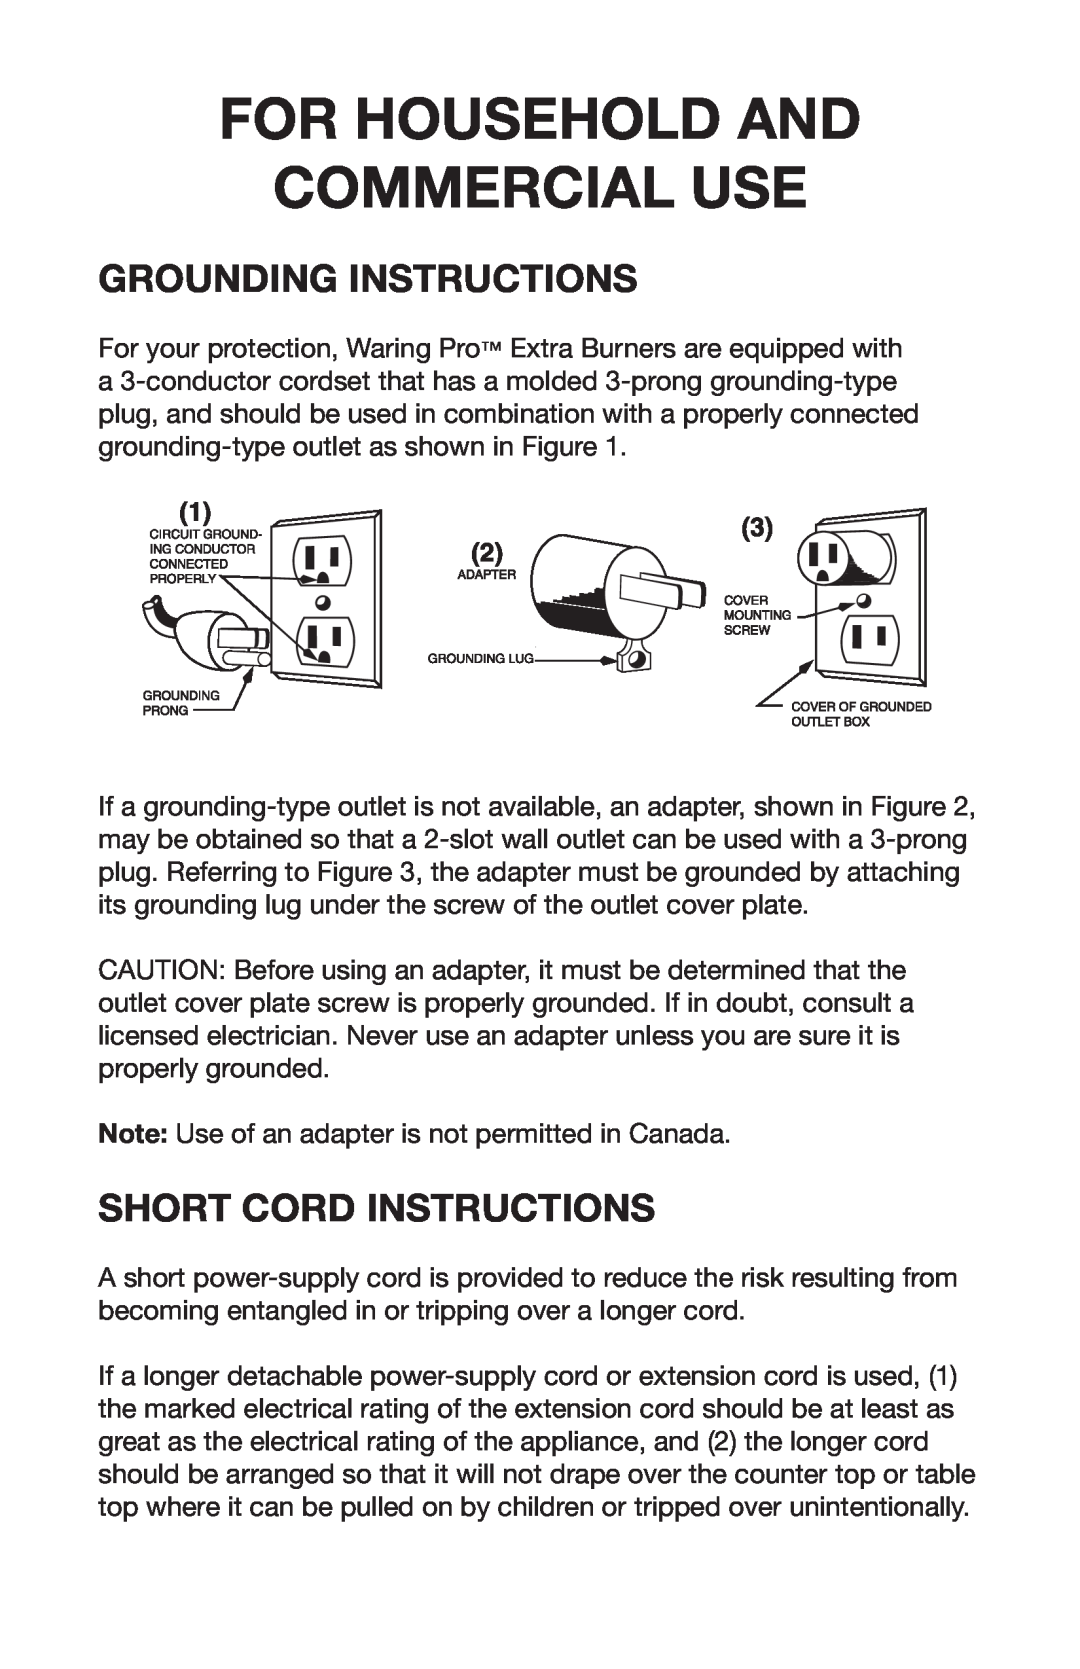 Waring SB30 manual For Household And Commercial Use, Grounding Instructions, Short Cord Instructions 